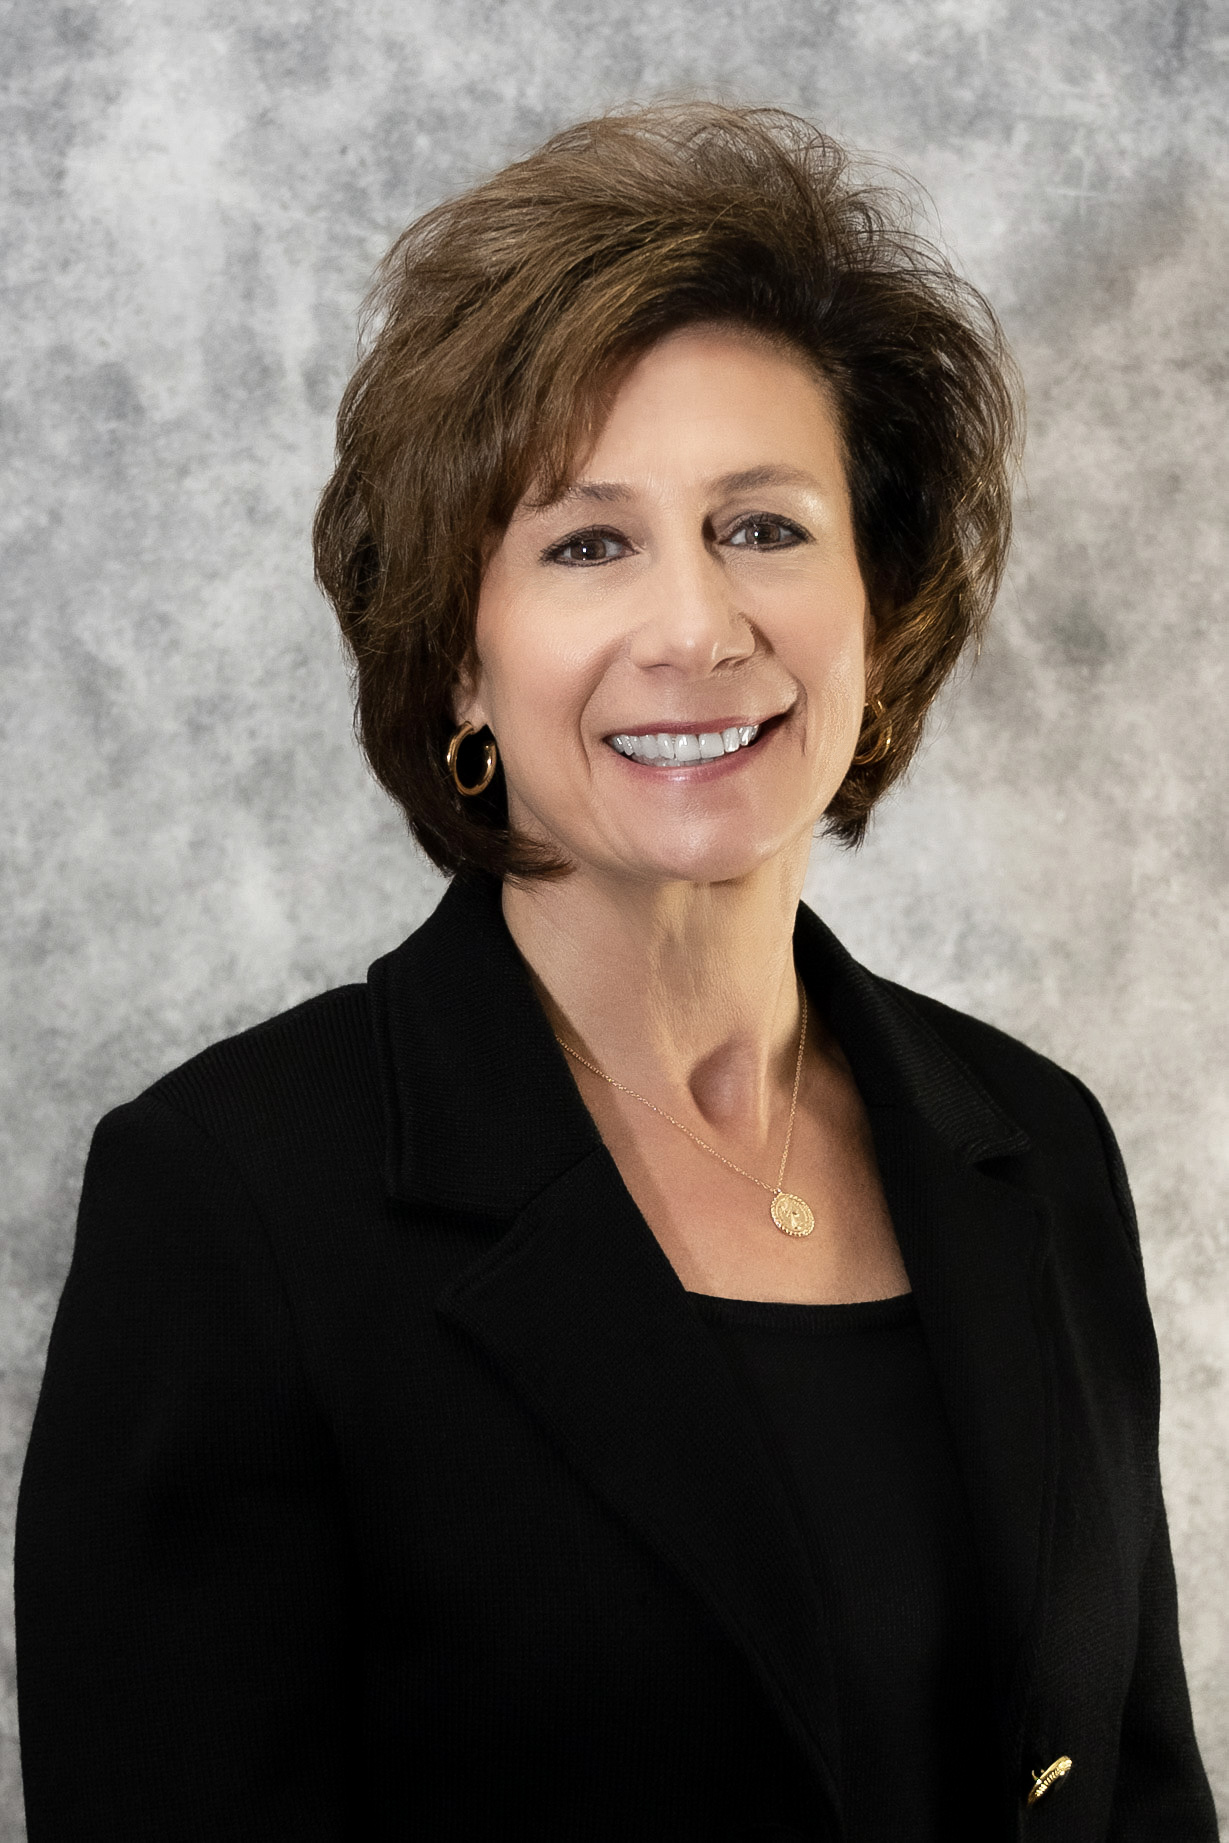 MGCCC President Dr. Mary S. Graham named one of the state’s Top CEOs for 2023